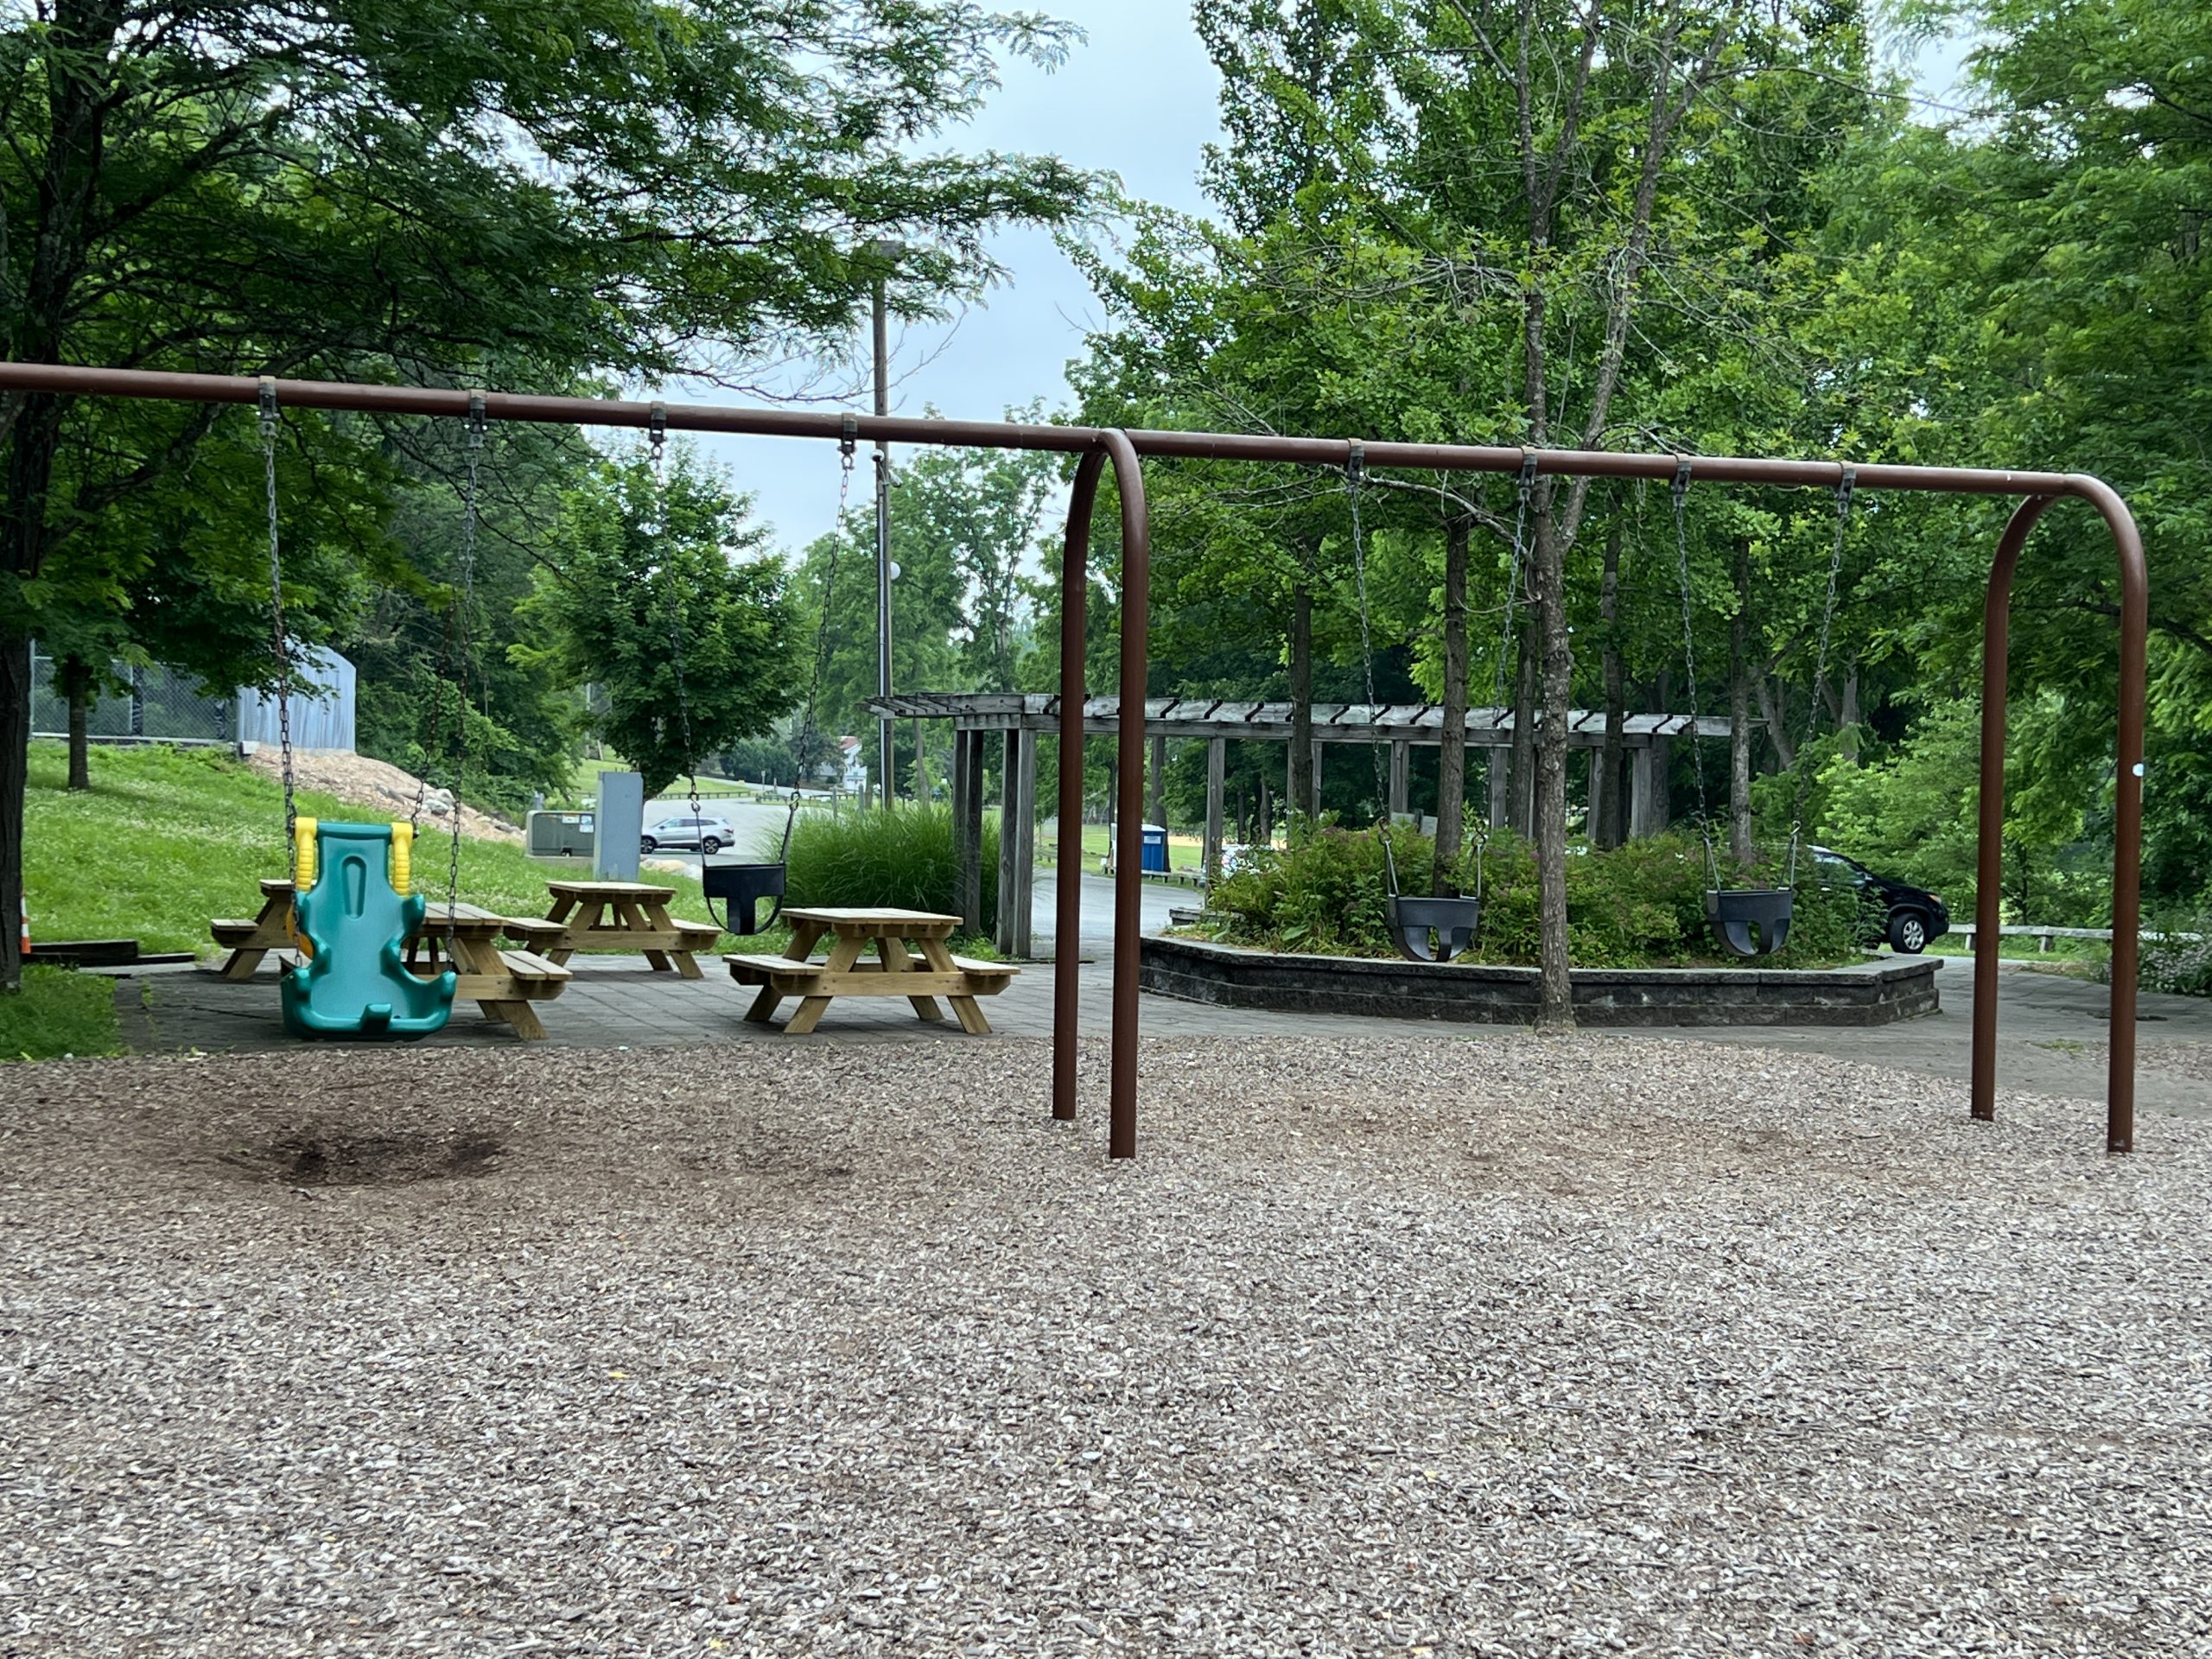 Kids Kastle Station Park Playground in Sparta NJ baby swings and accessible swing